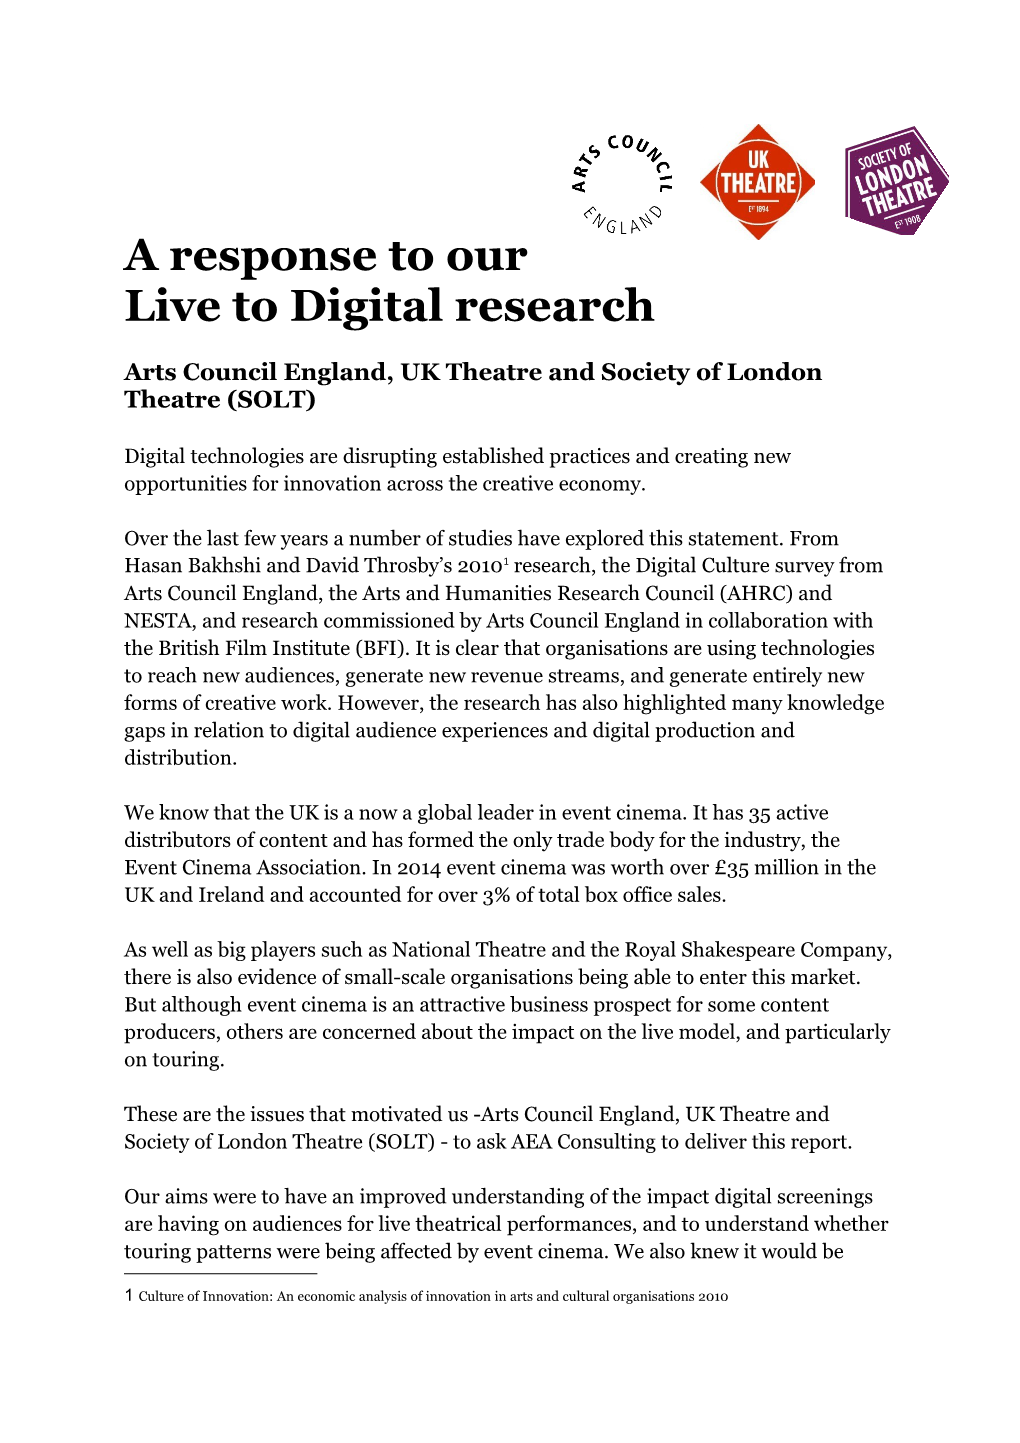 Arts Council England, UK Theatre and Society of London Theatre (SOLT)